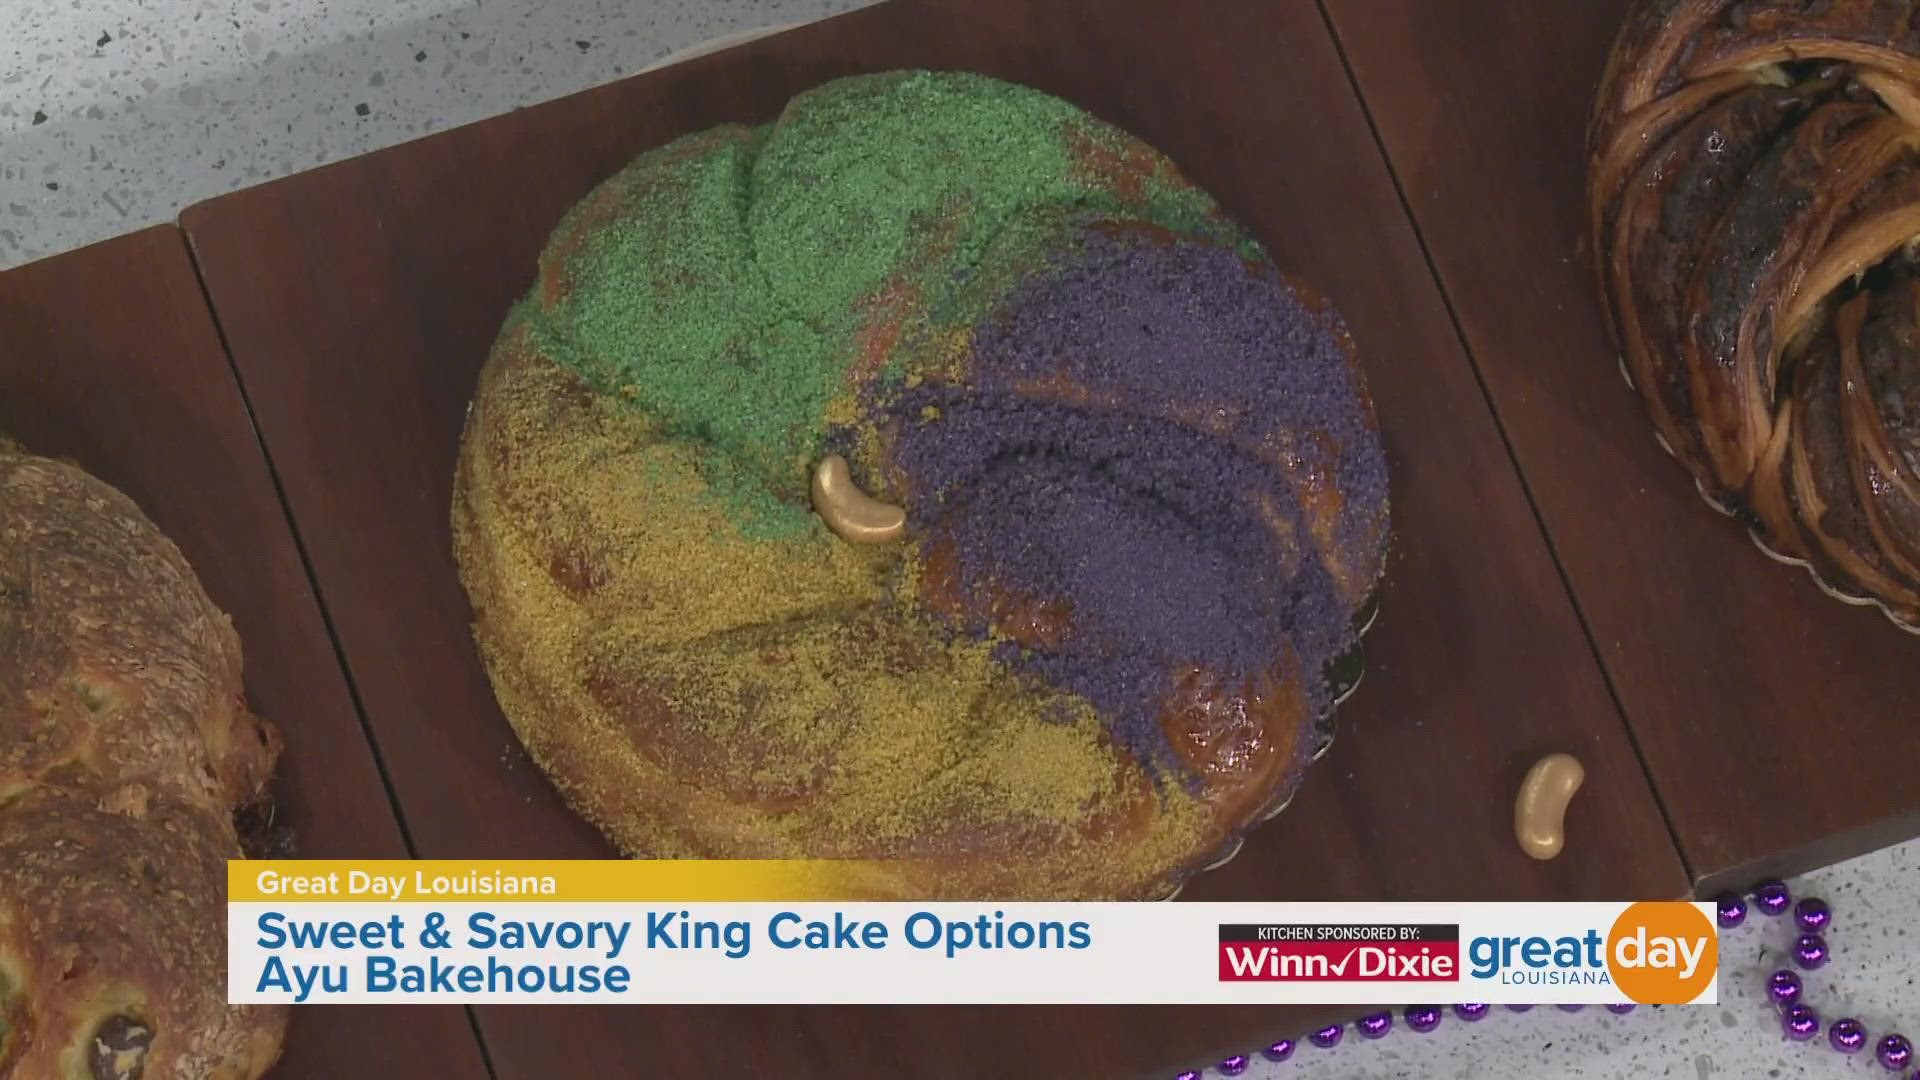 Ayu Bakehouse shares their king cake options, from a traditional style to a muffaletta inspired king cake.